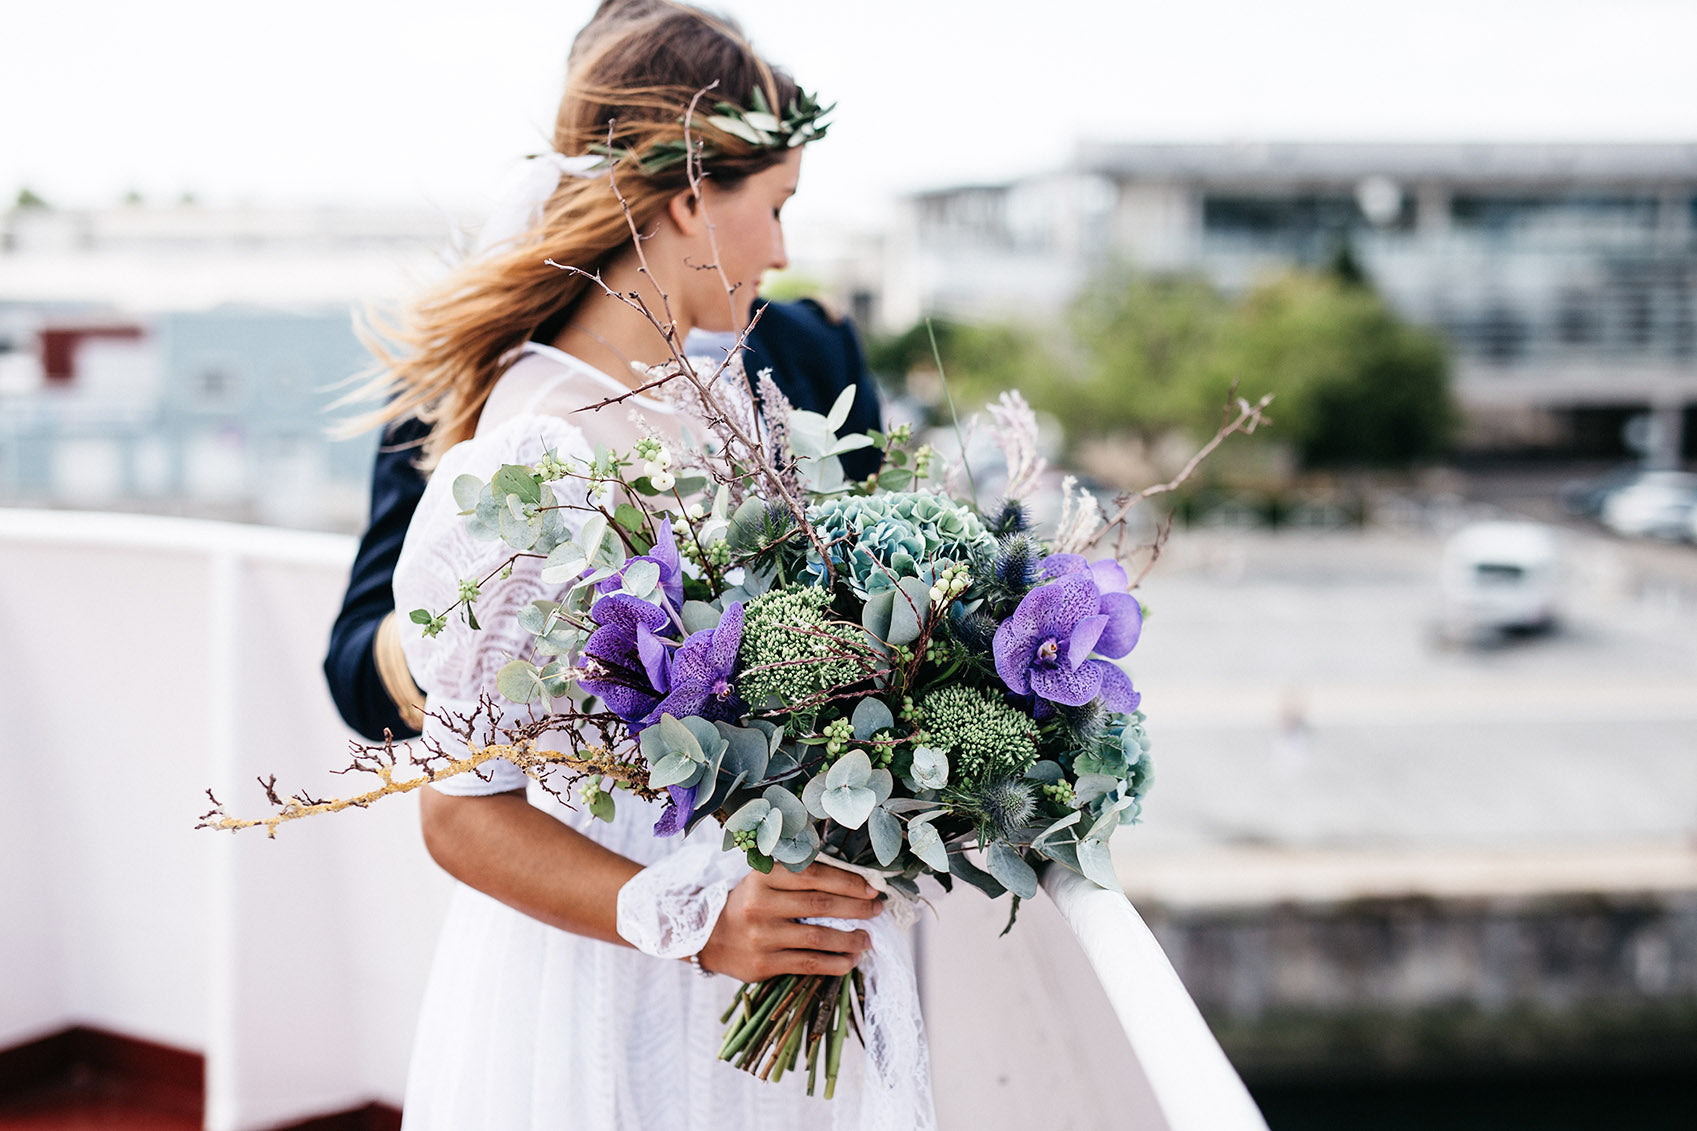 Picking the perfect flowers for your big day